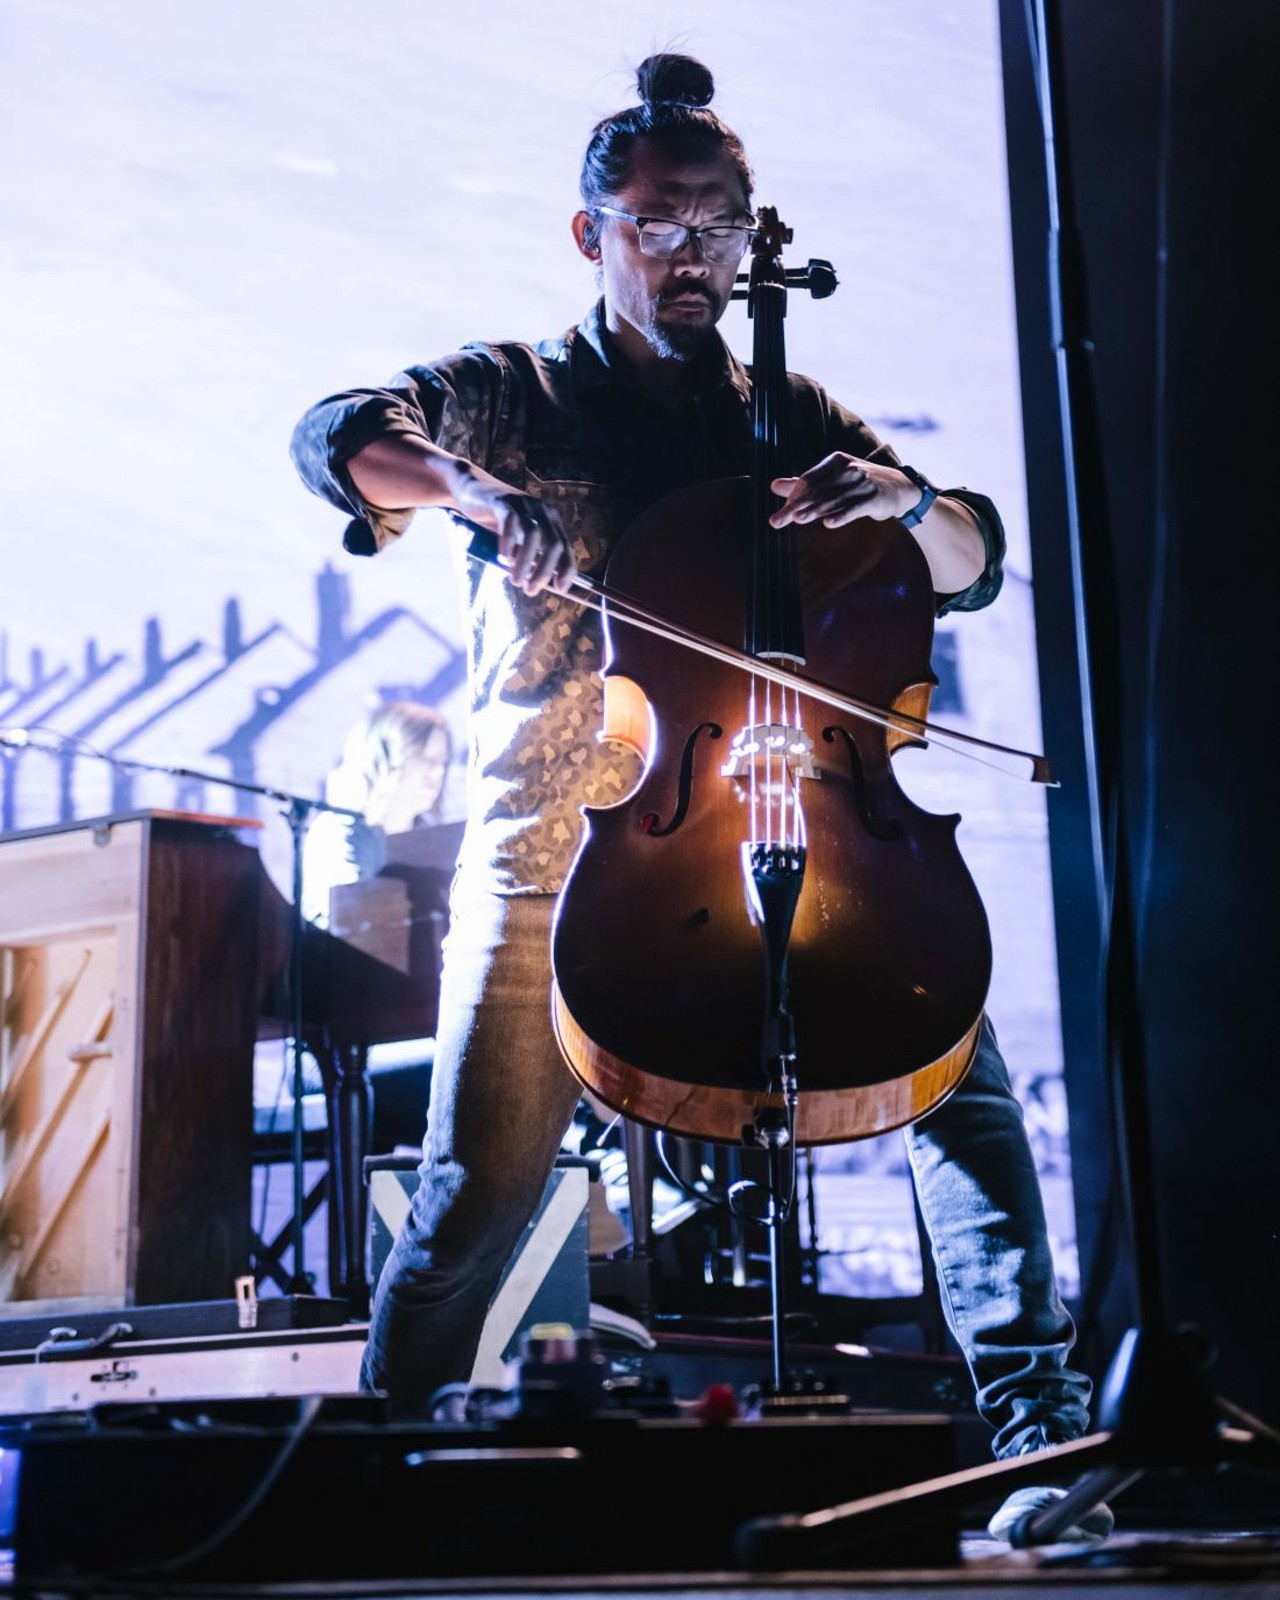 The Avett Brothers Performing at the Wolstein Center